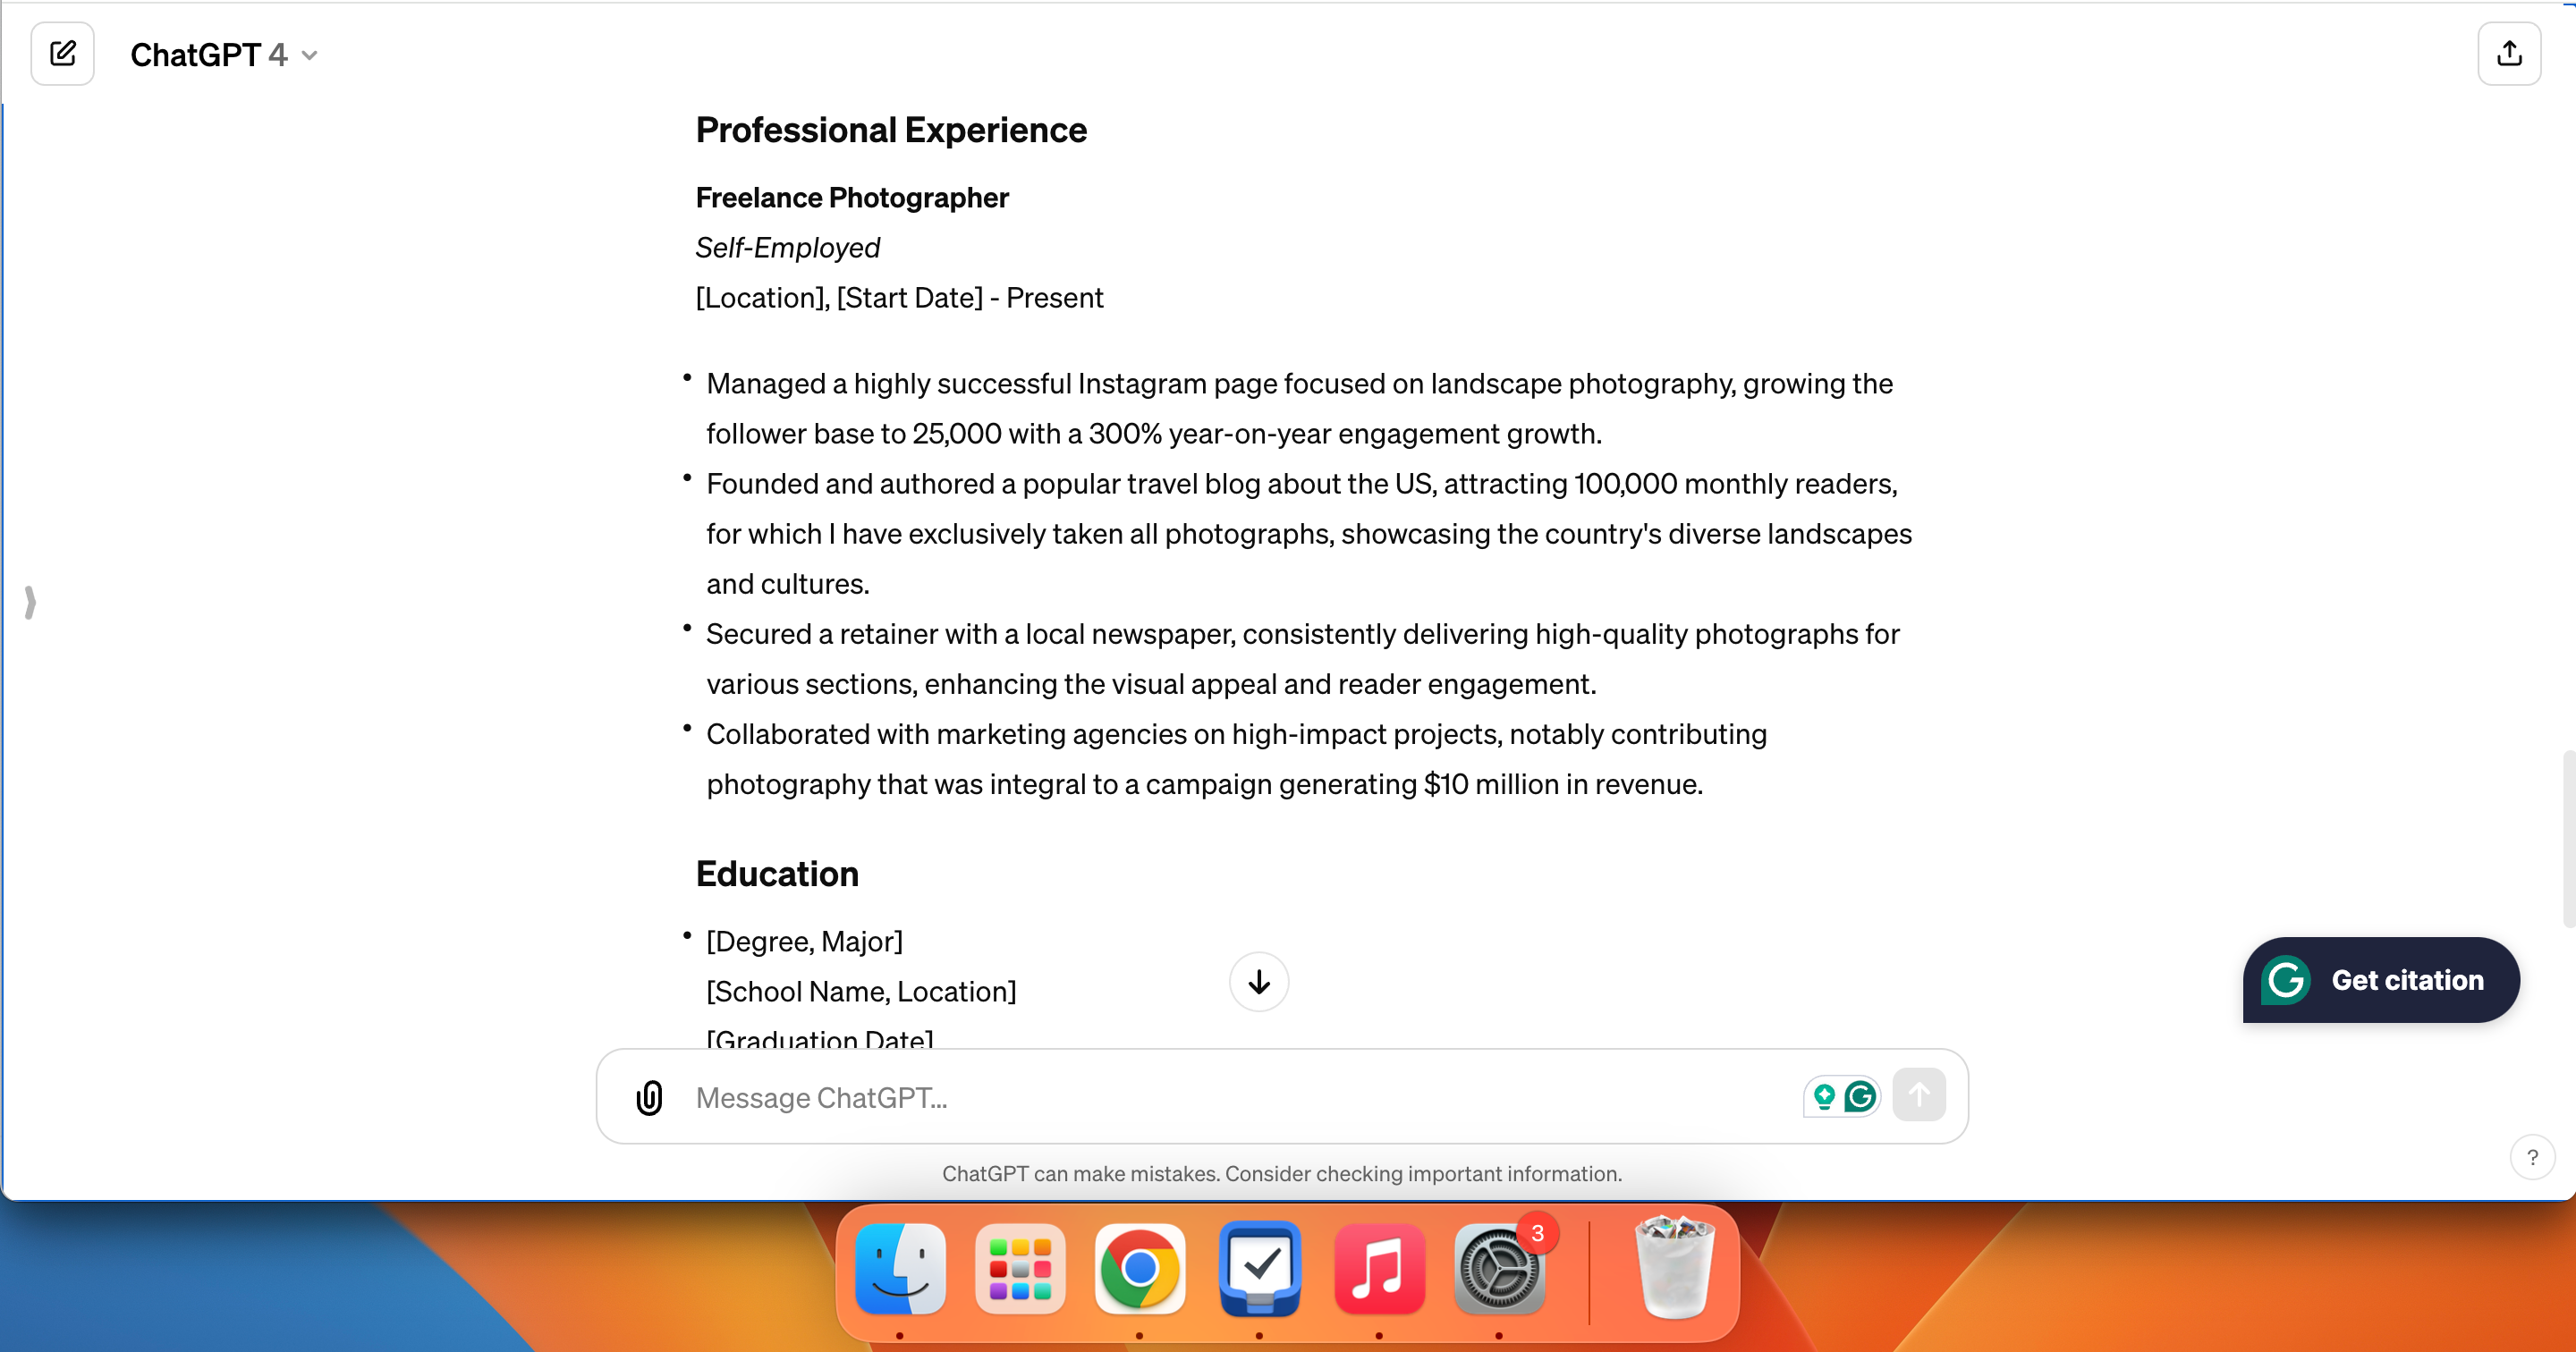 Professional Experience Outlined in a Resume With ChatGPT